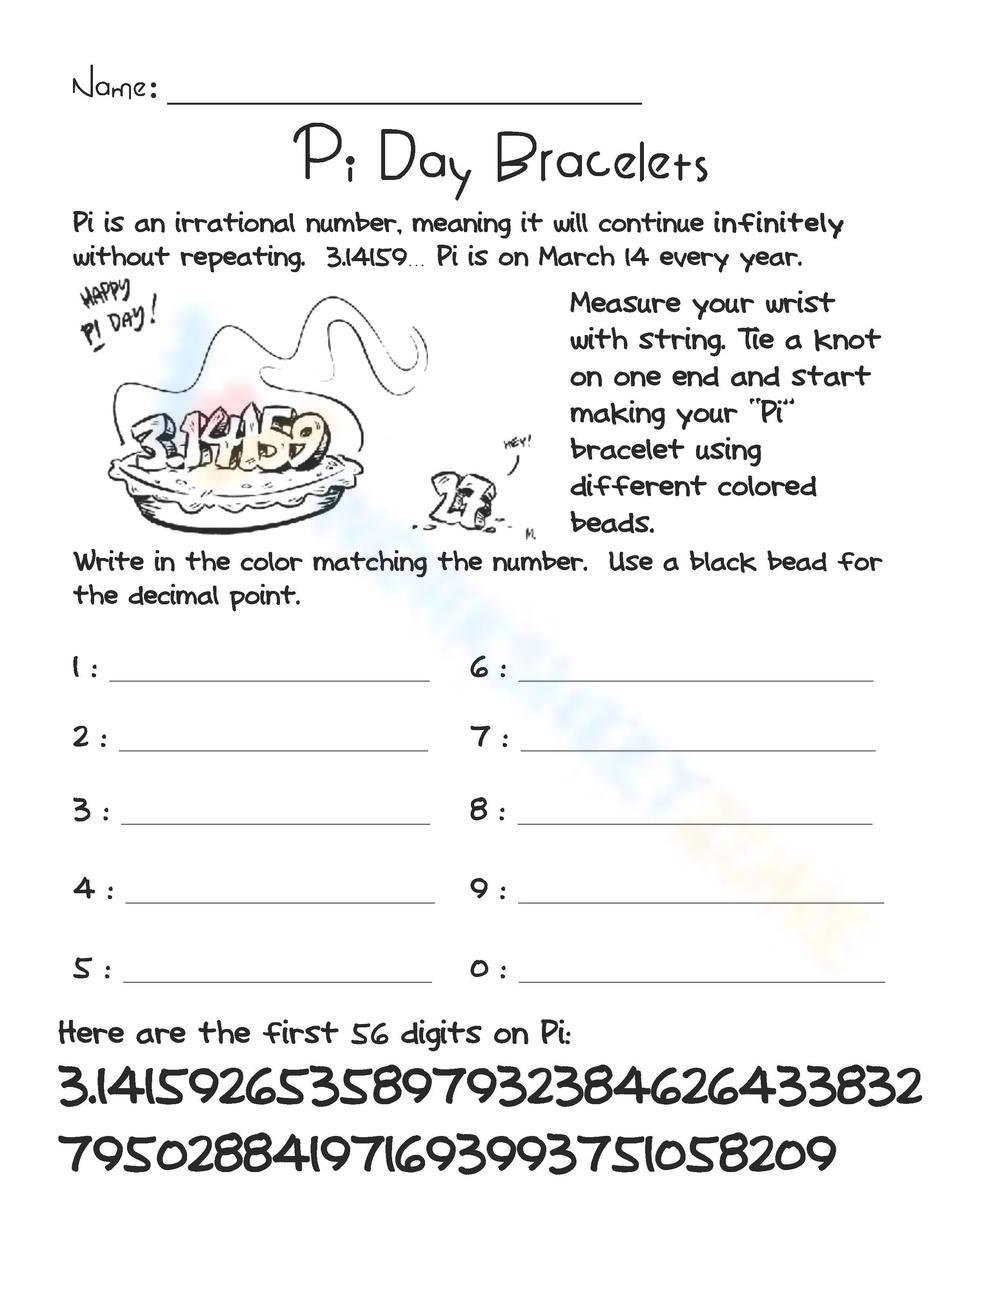 Pi-Day branches